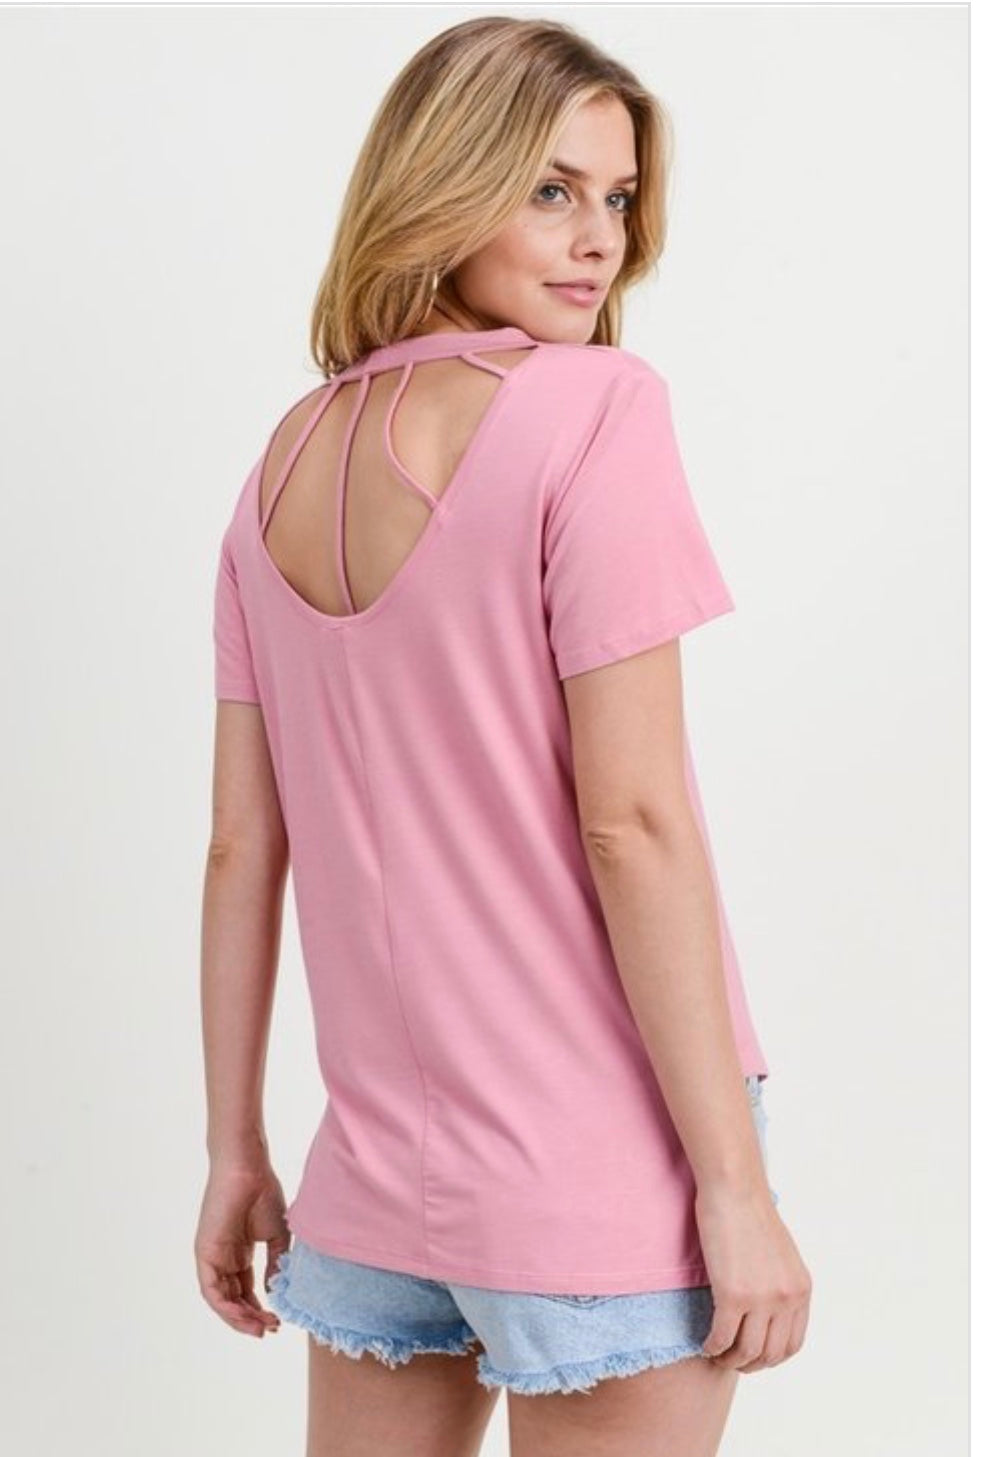 Womens Pastel Pink Short Sleeve Top Tops MomMe and More 